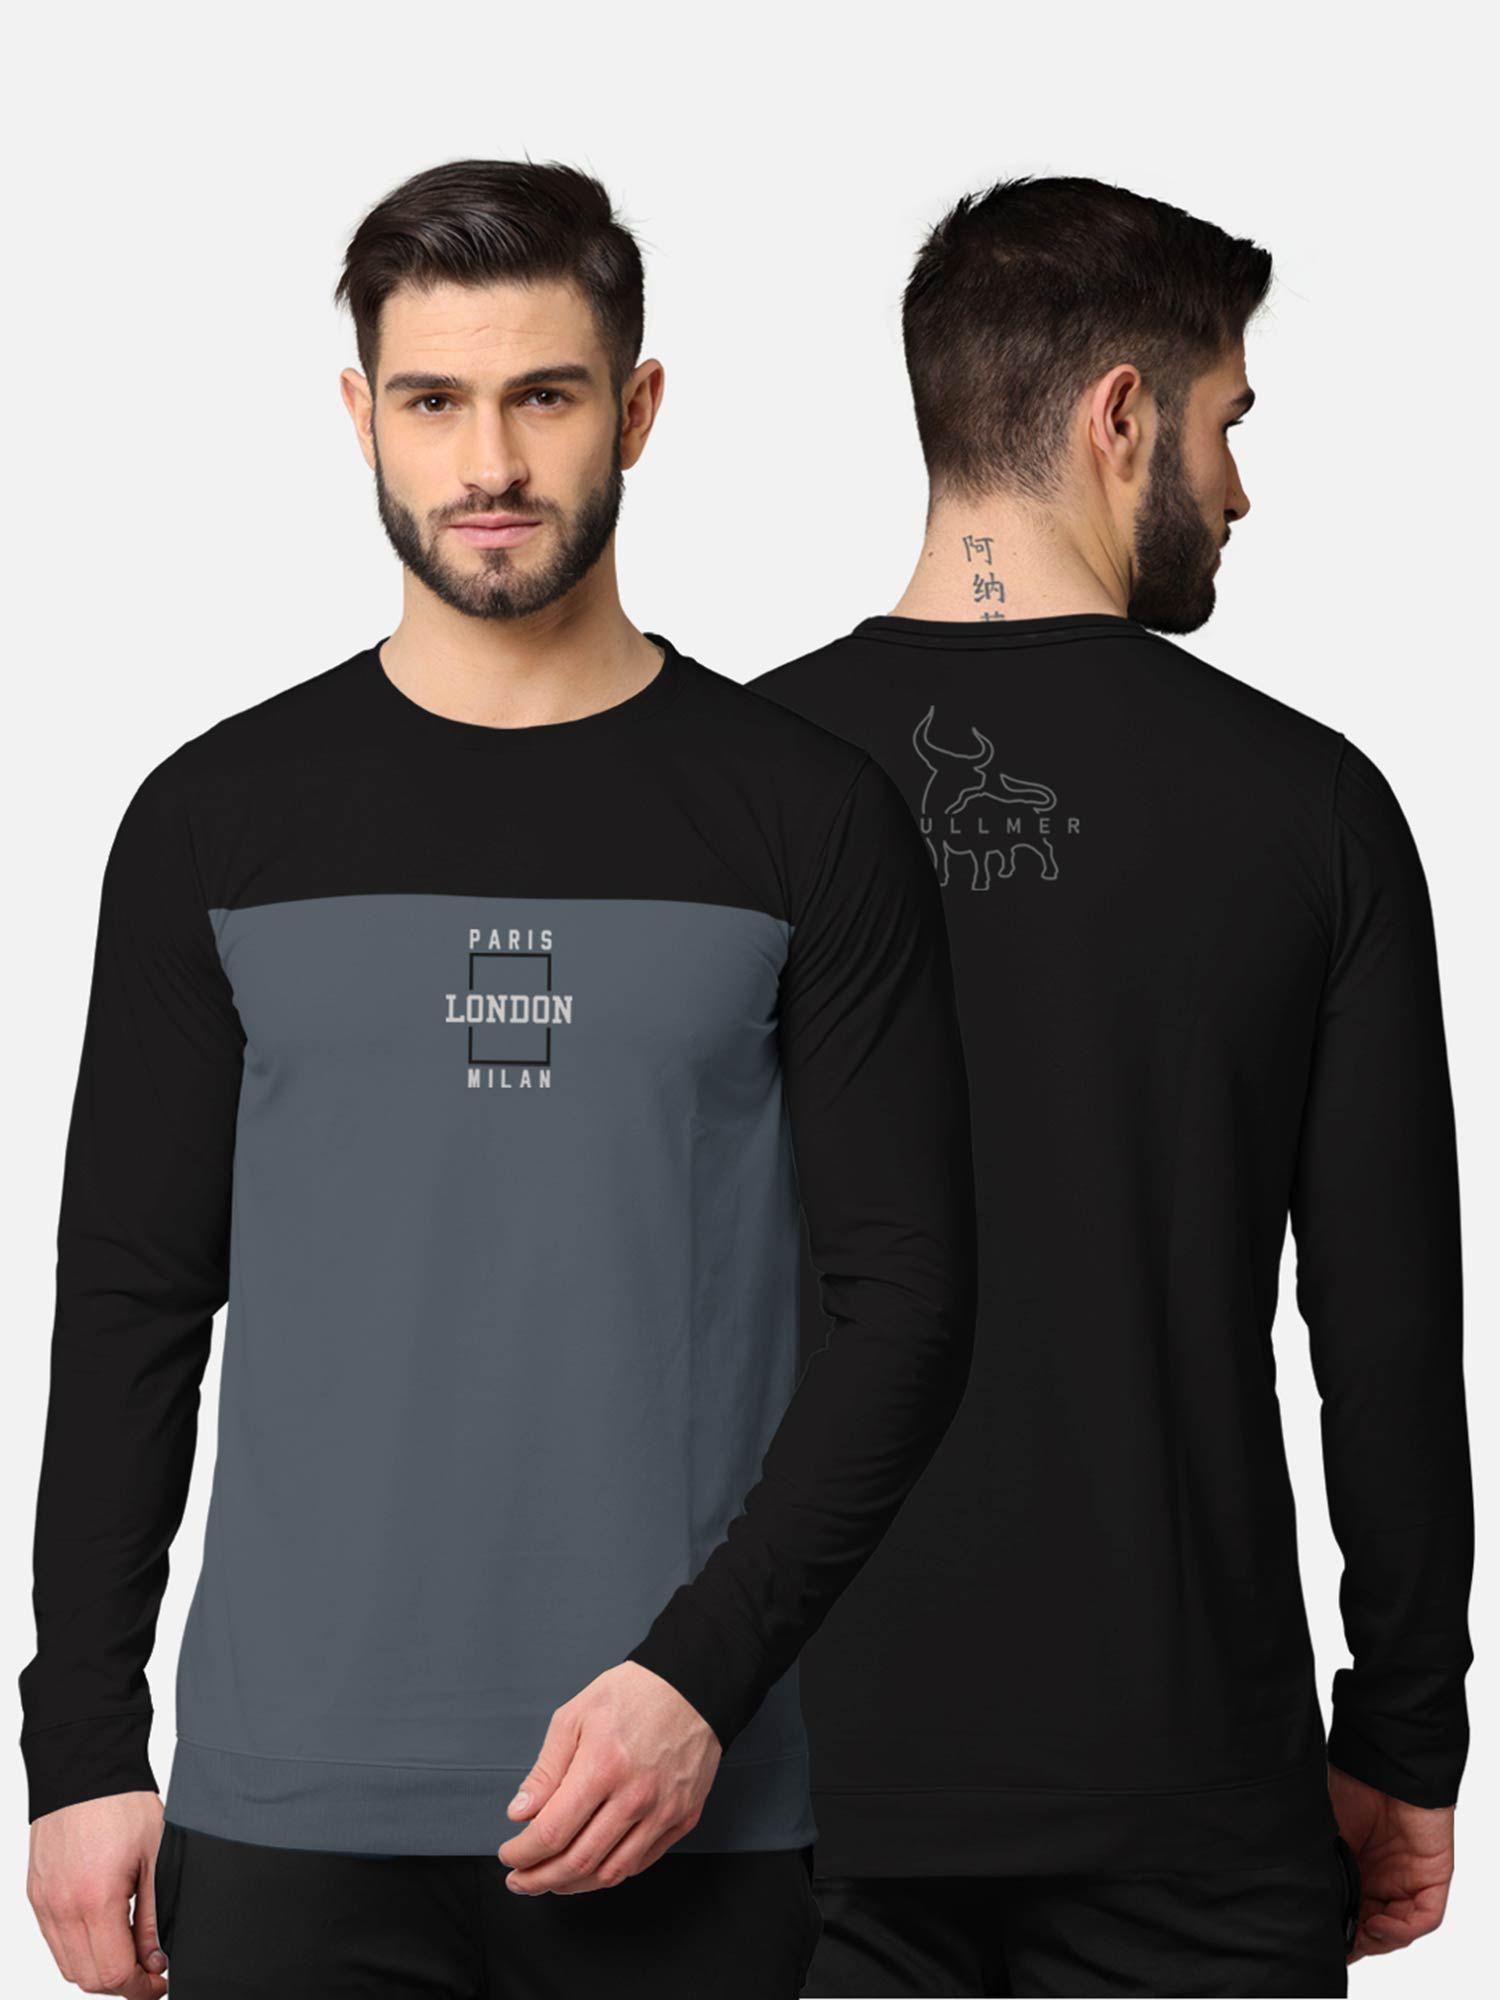 trendy-front-&-back-colorblock-full-sleeve-t-shirt-for-men-black-and-grey